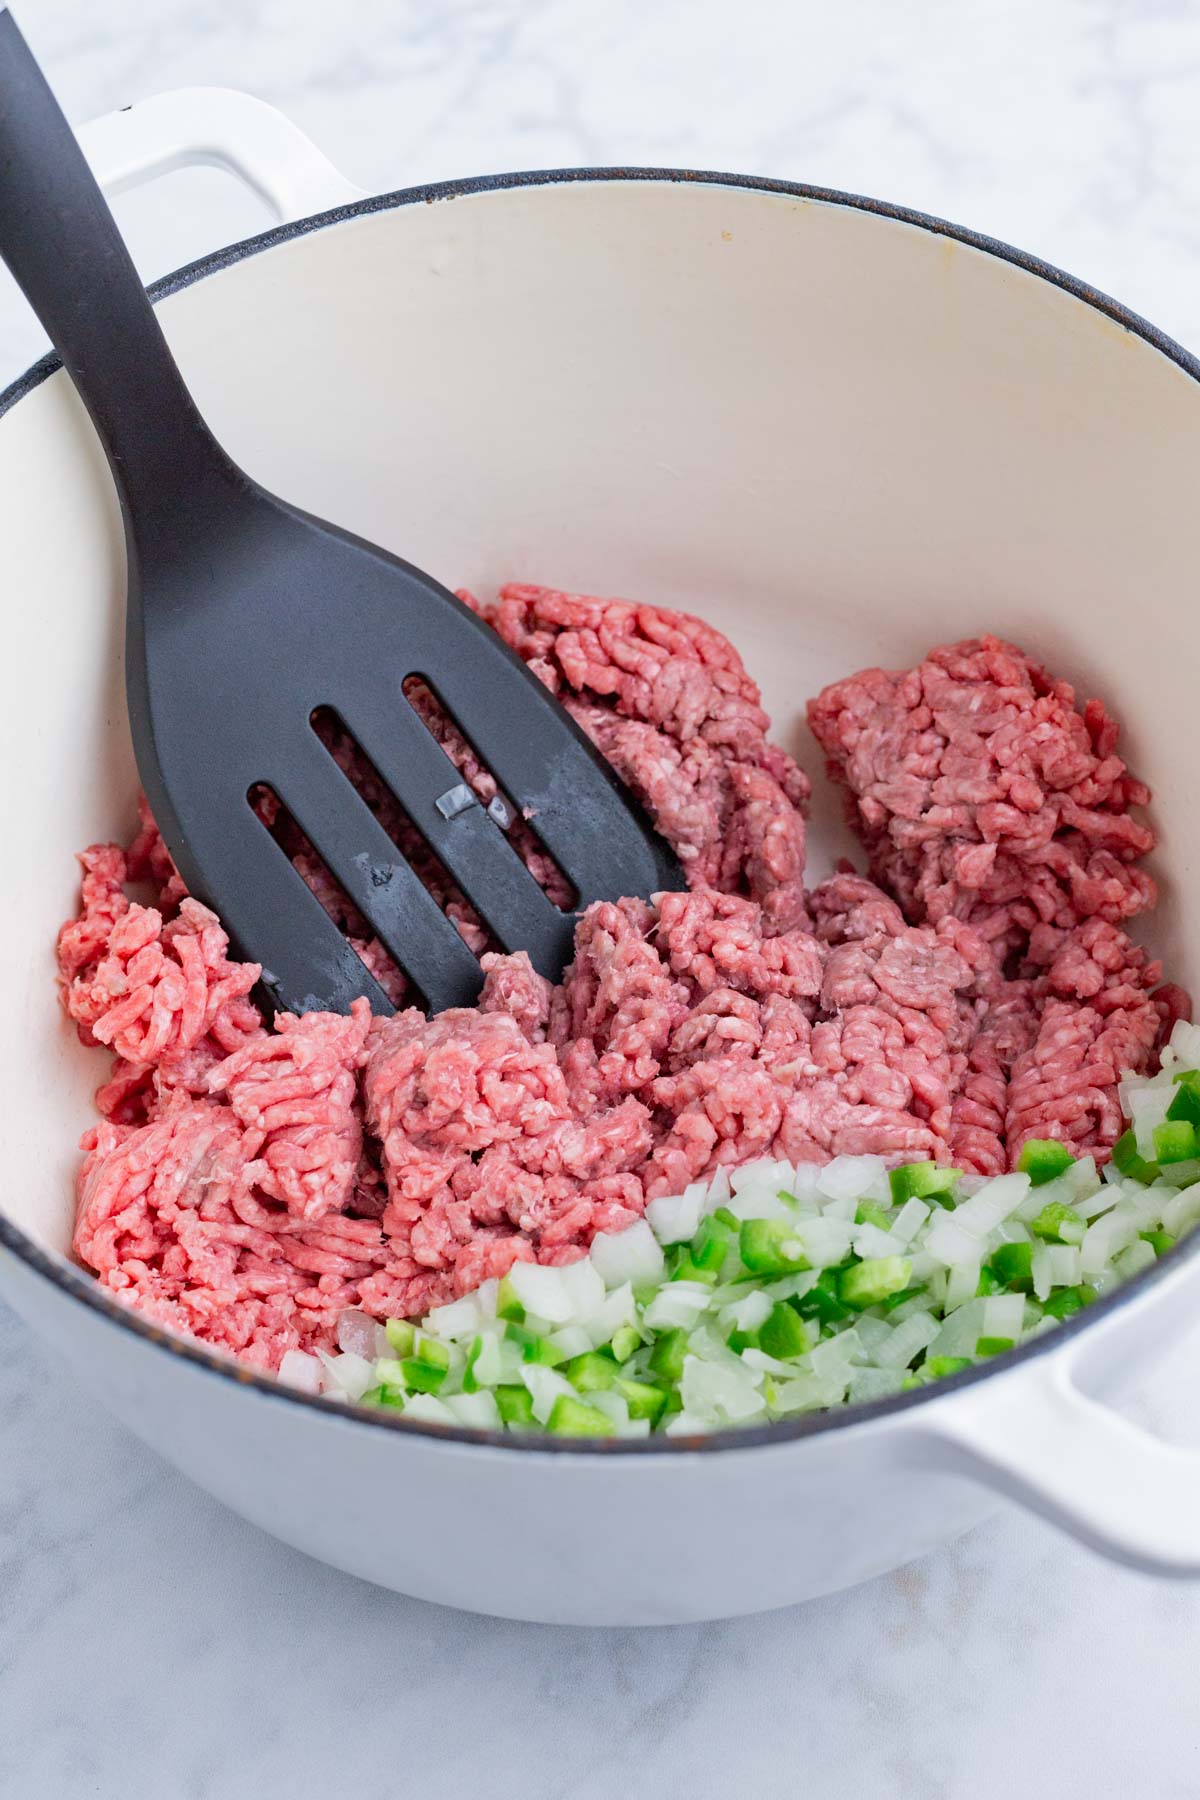 Ground beef is cooked in a pot by the veggies.